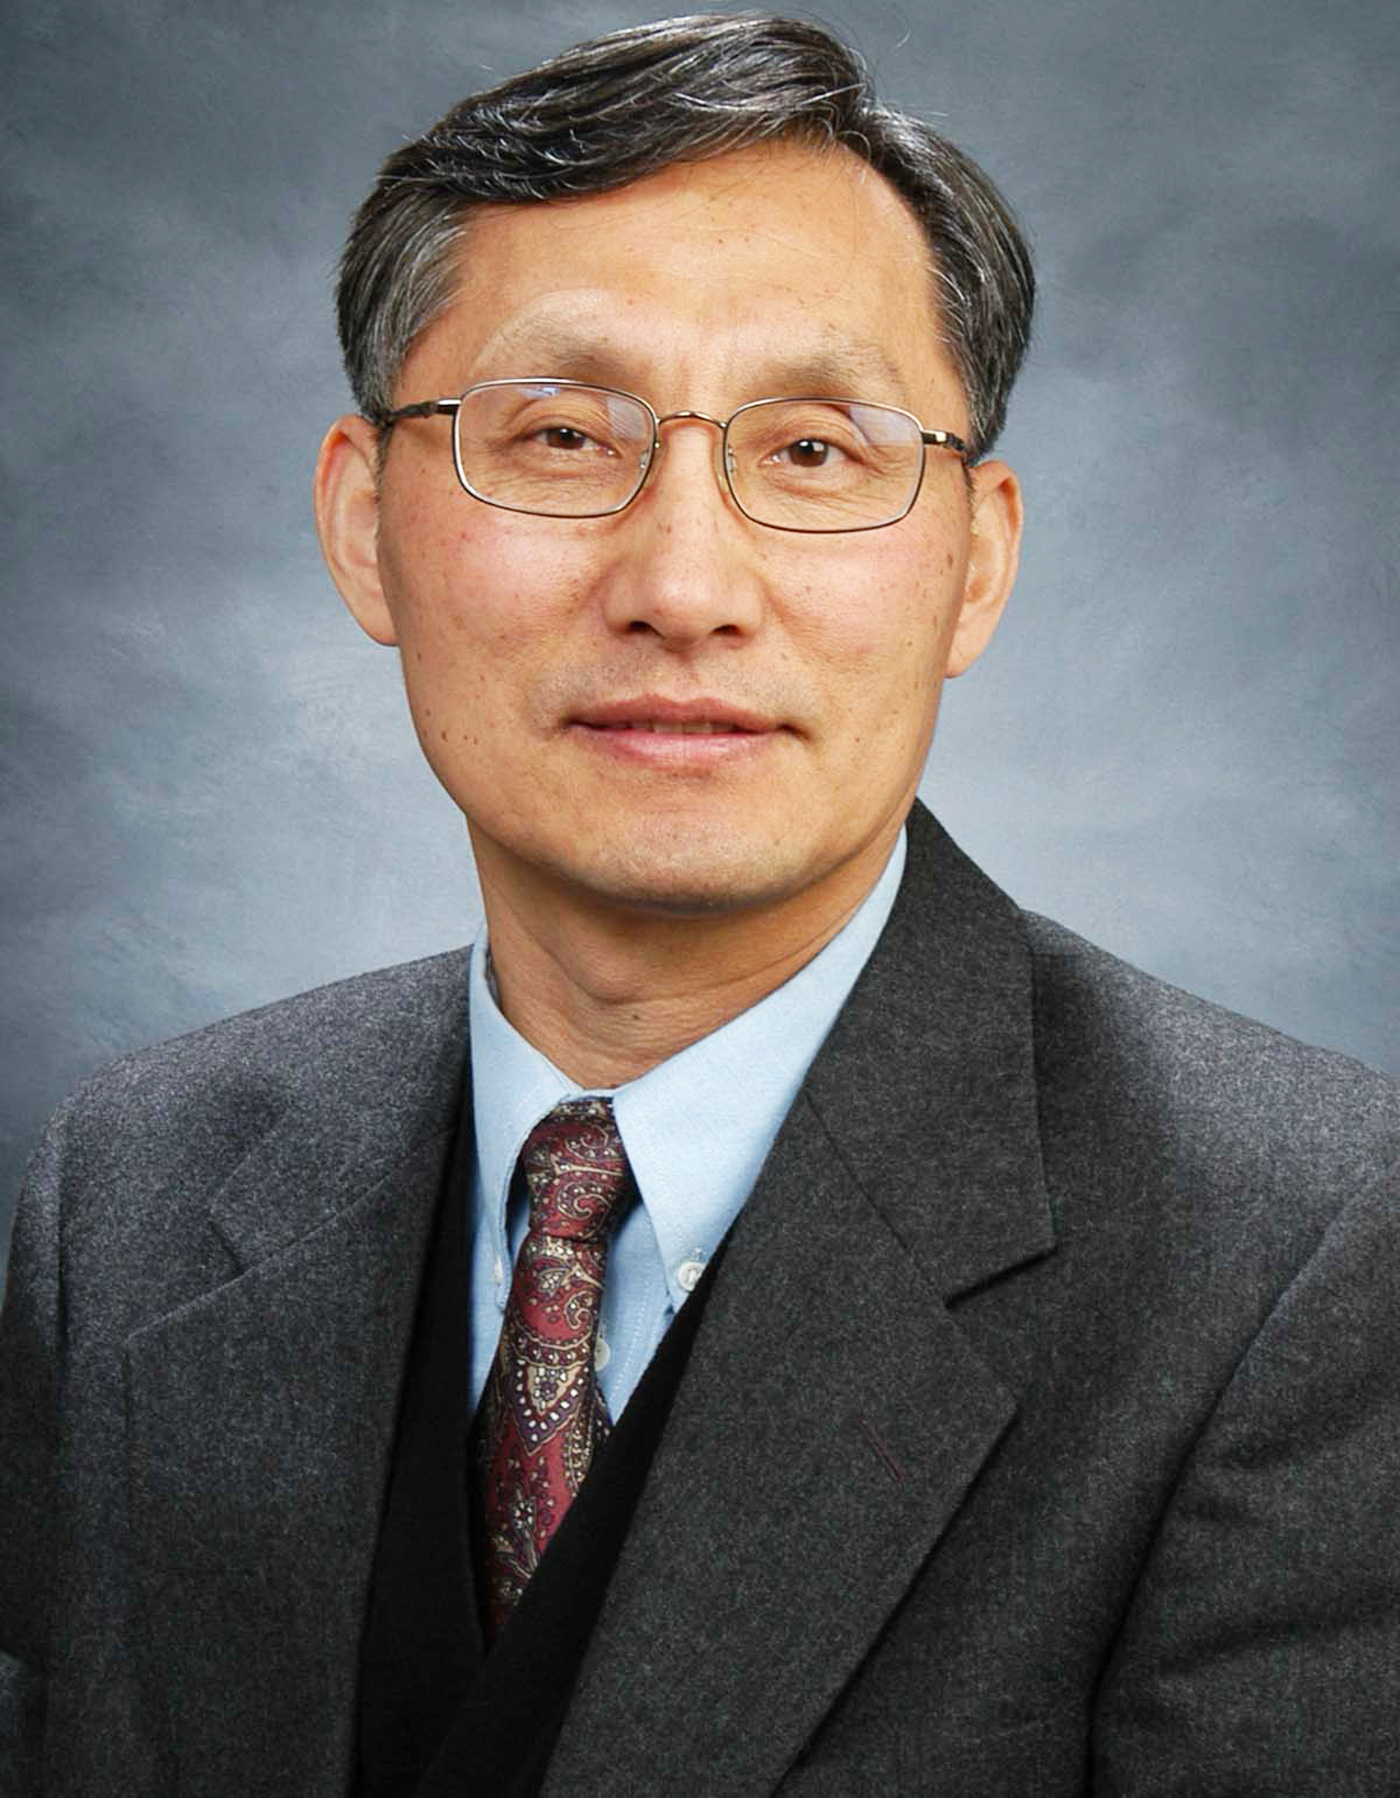 Eunsang Yoon is a MEI Professor in the Manning School of Business in the Marketing Entrepreneurship and Innovation Dept. at UMass Lowell